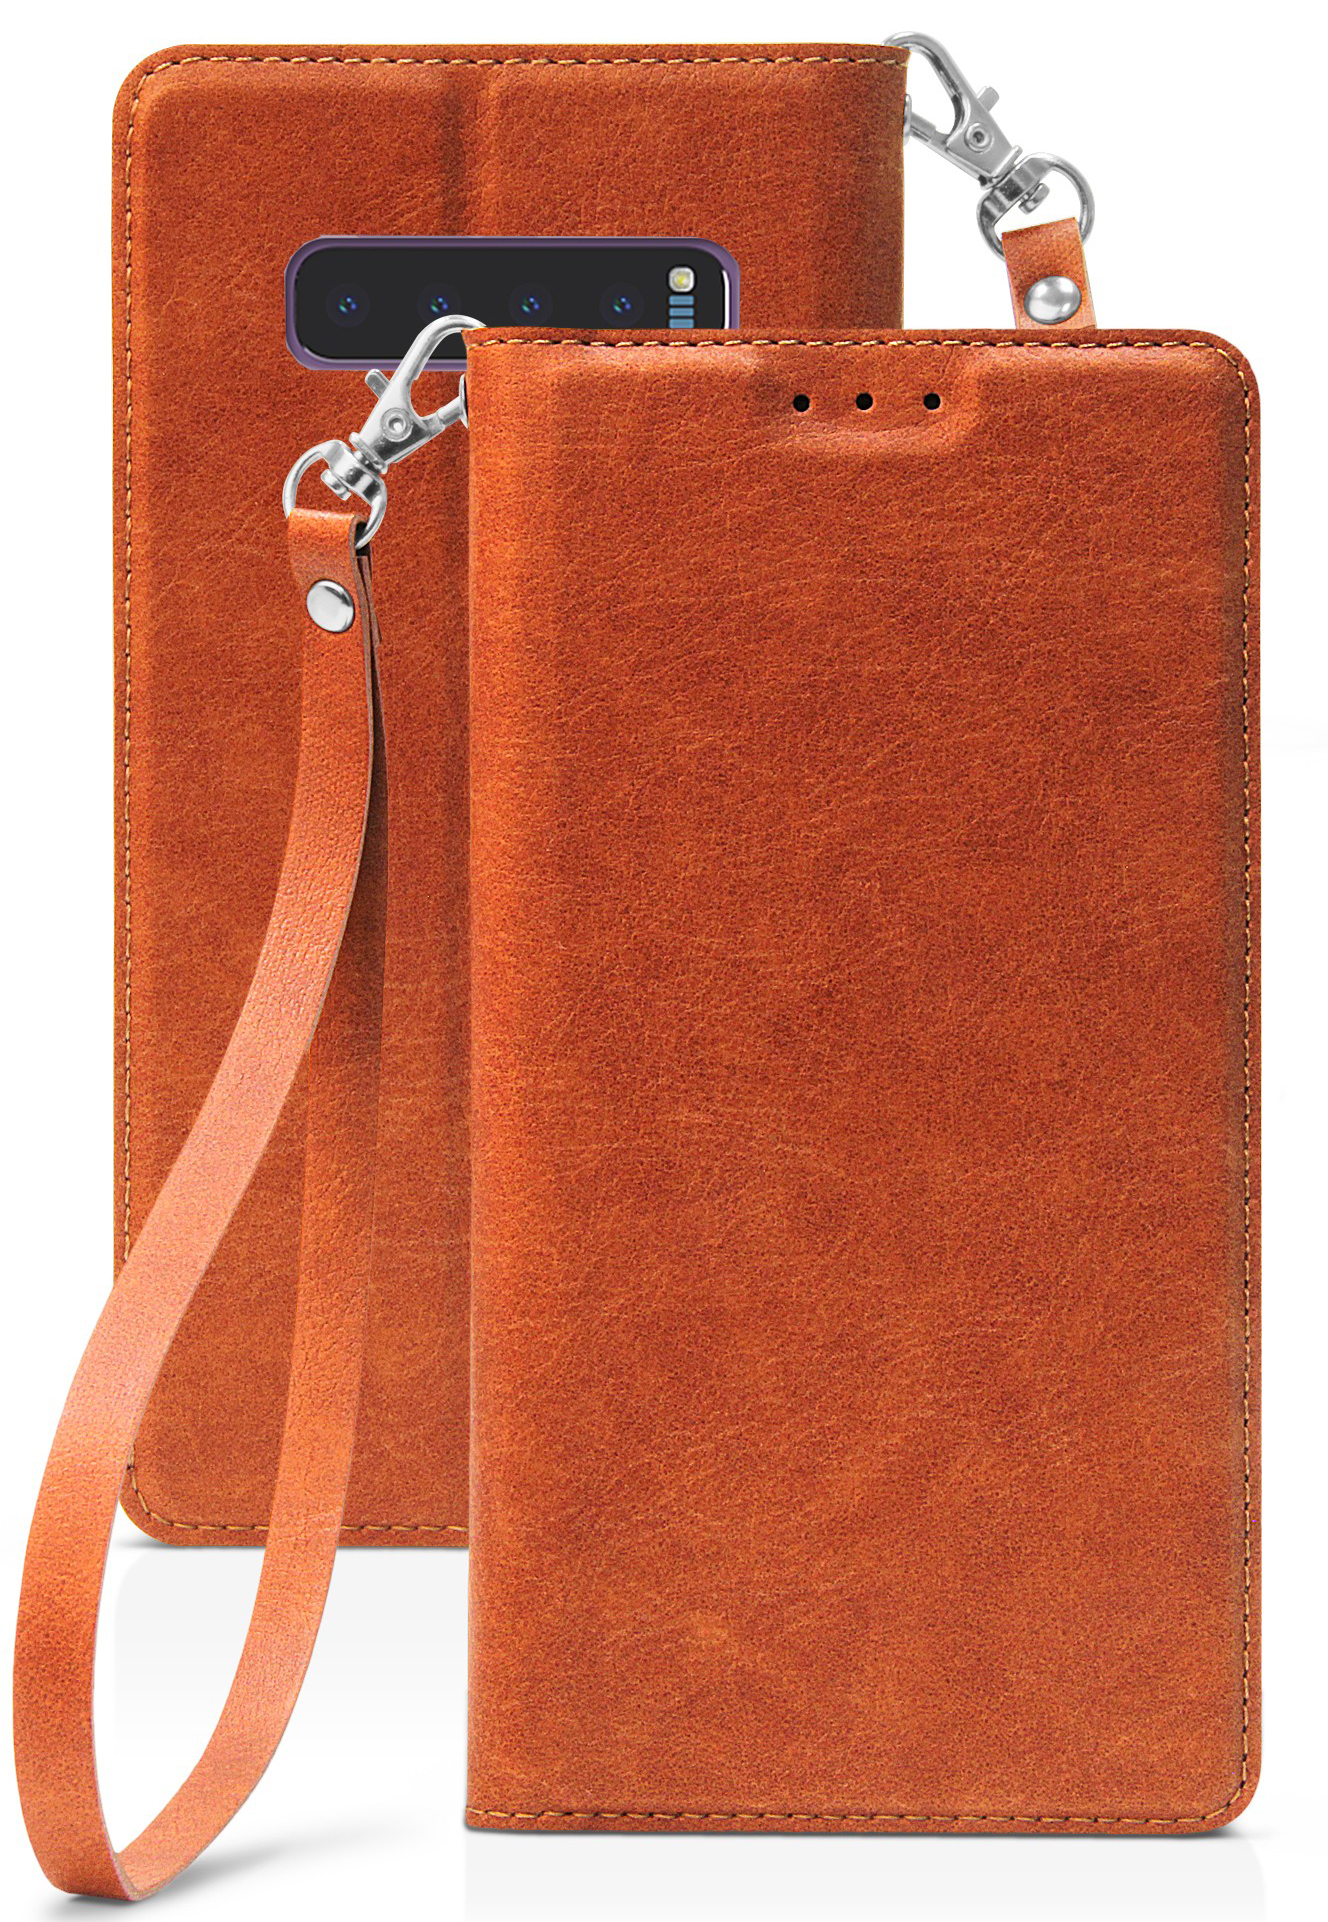 Case for Galaxy S10 Plus, [Brown] Folio Leather Wallet Credit Card Slot ID Cover, View Stand [with Subtle Magnetic Closure and Wrist Strap Lanyard] for Samsung Galaxy S10 Plus Phone (SM-G975) s10+ - image 2 of 8